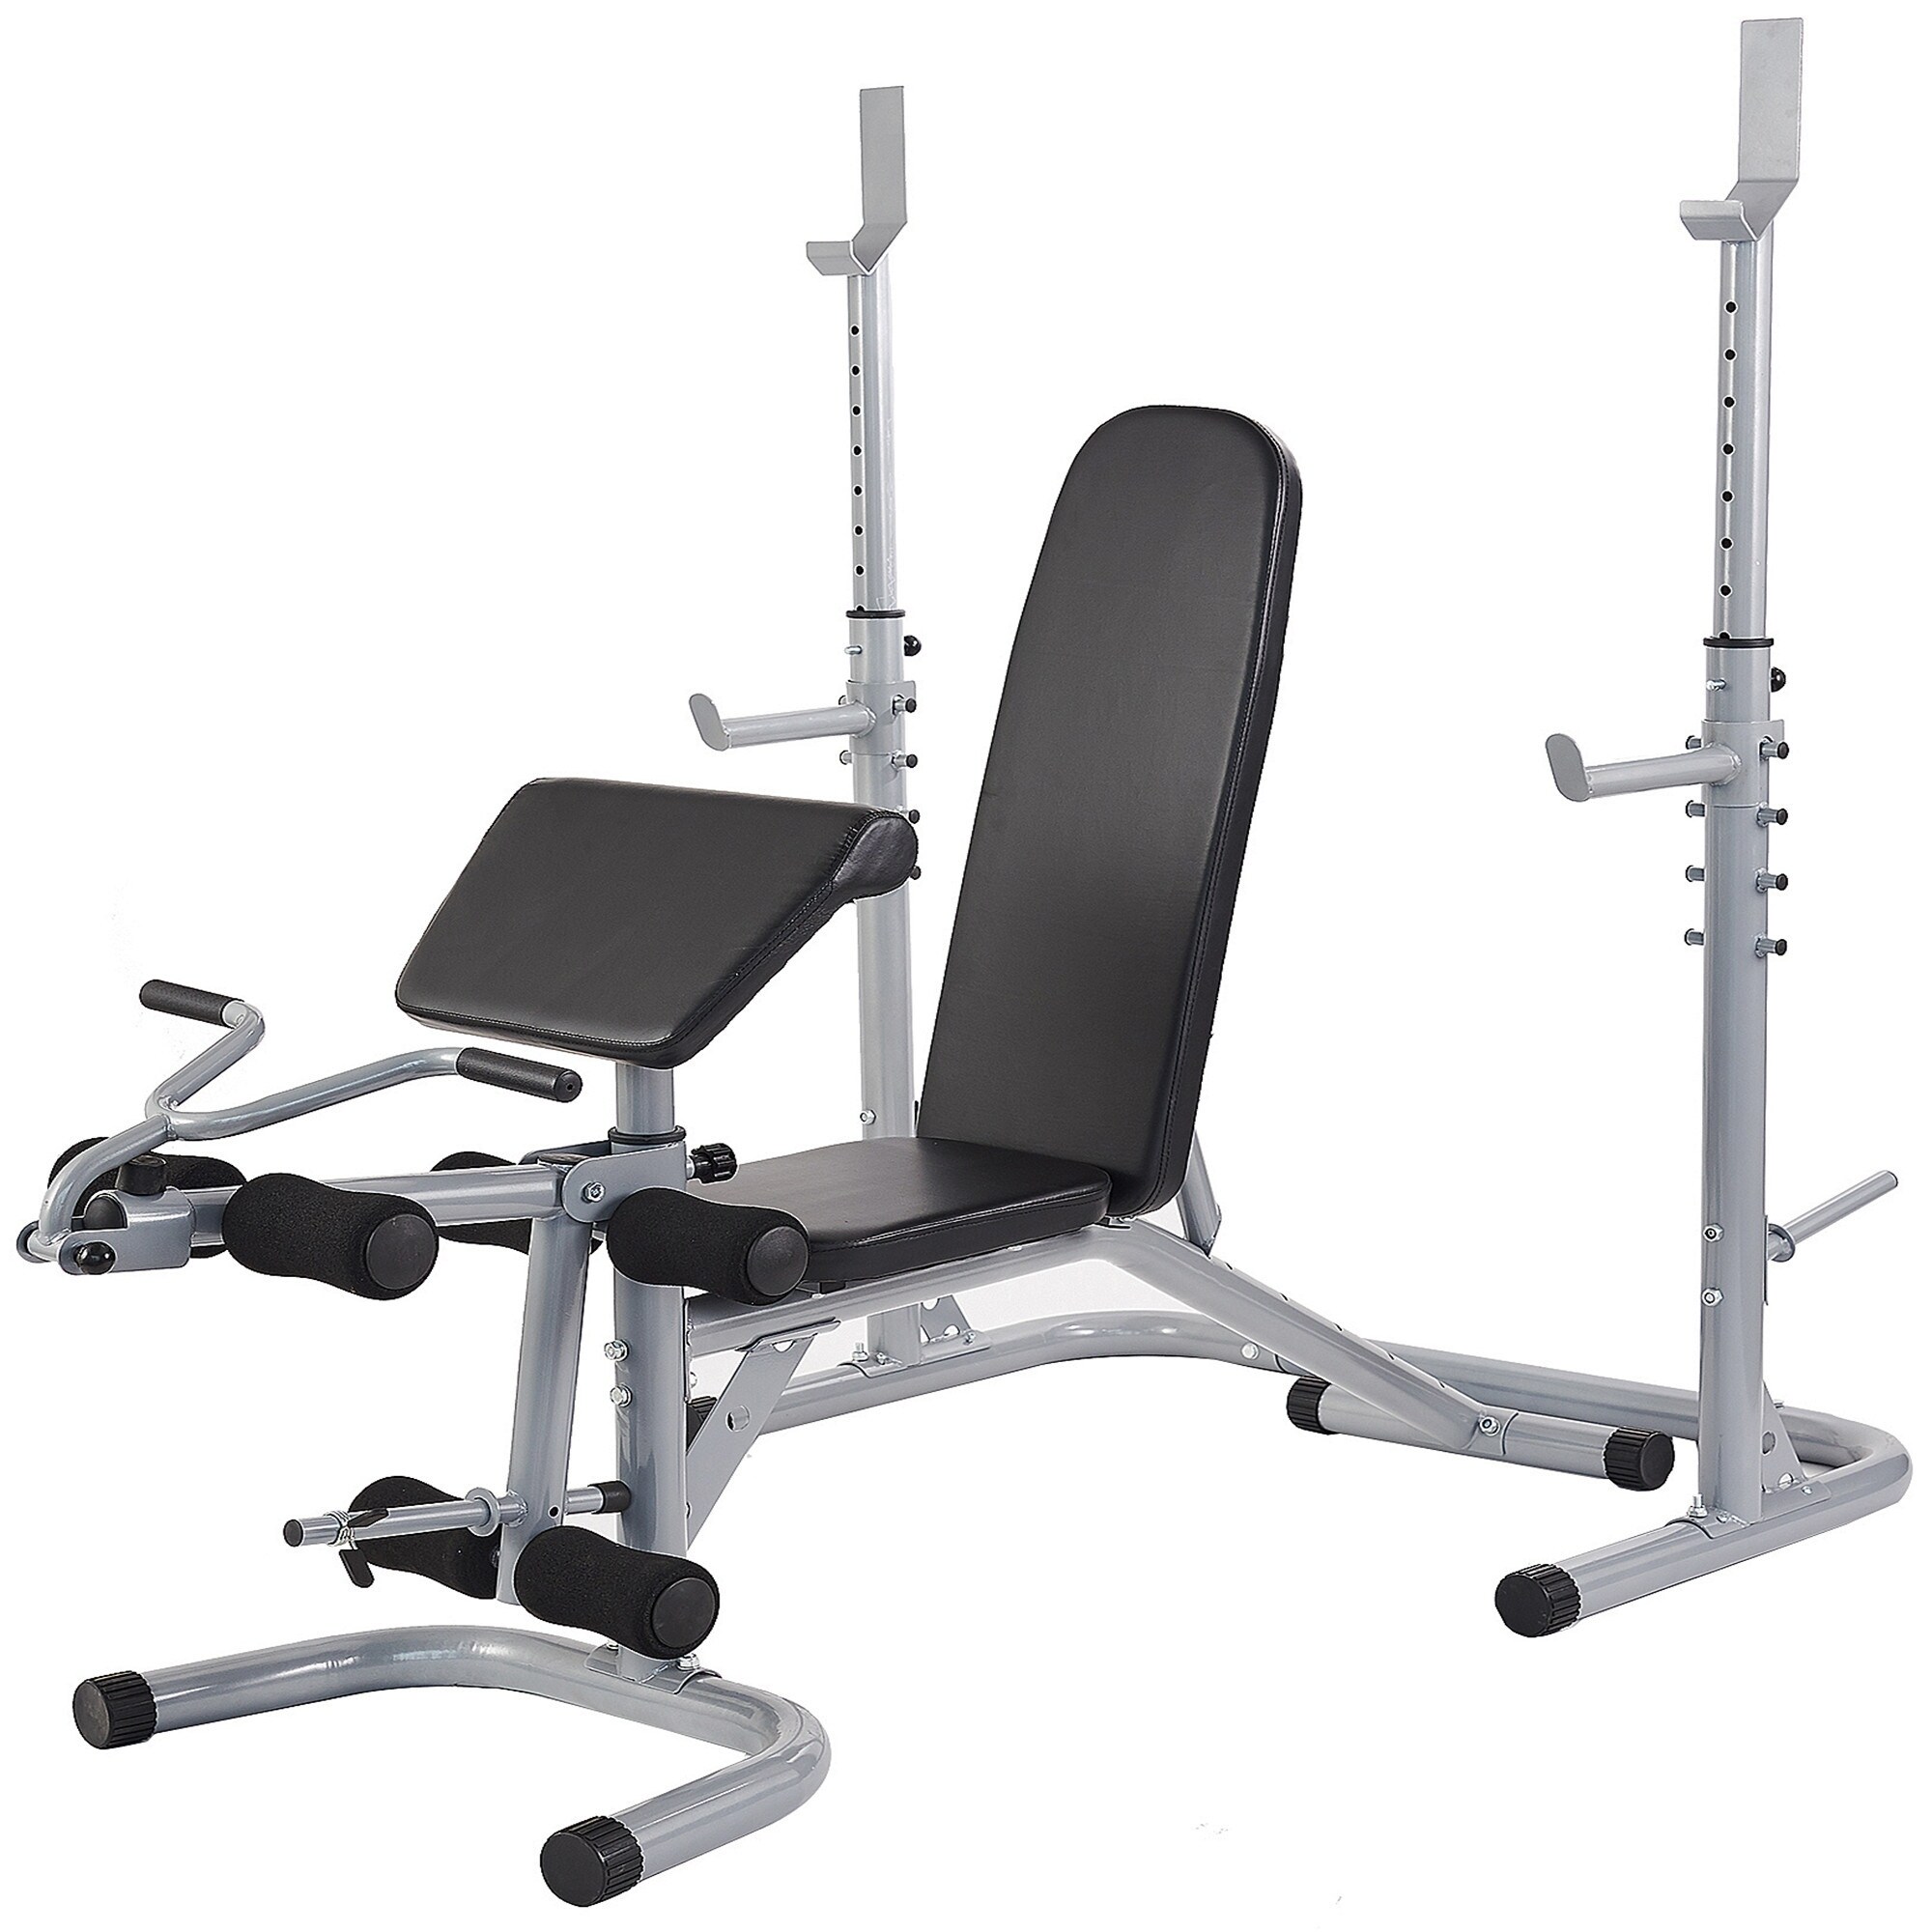 Multifunctional Workout Station Adjustable Bench with Squat Rack